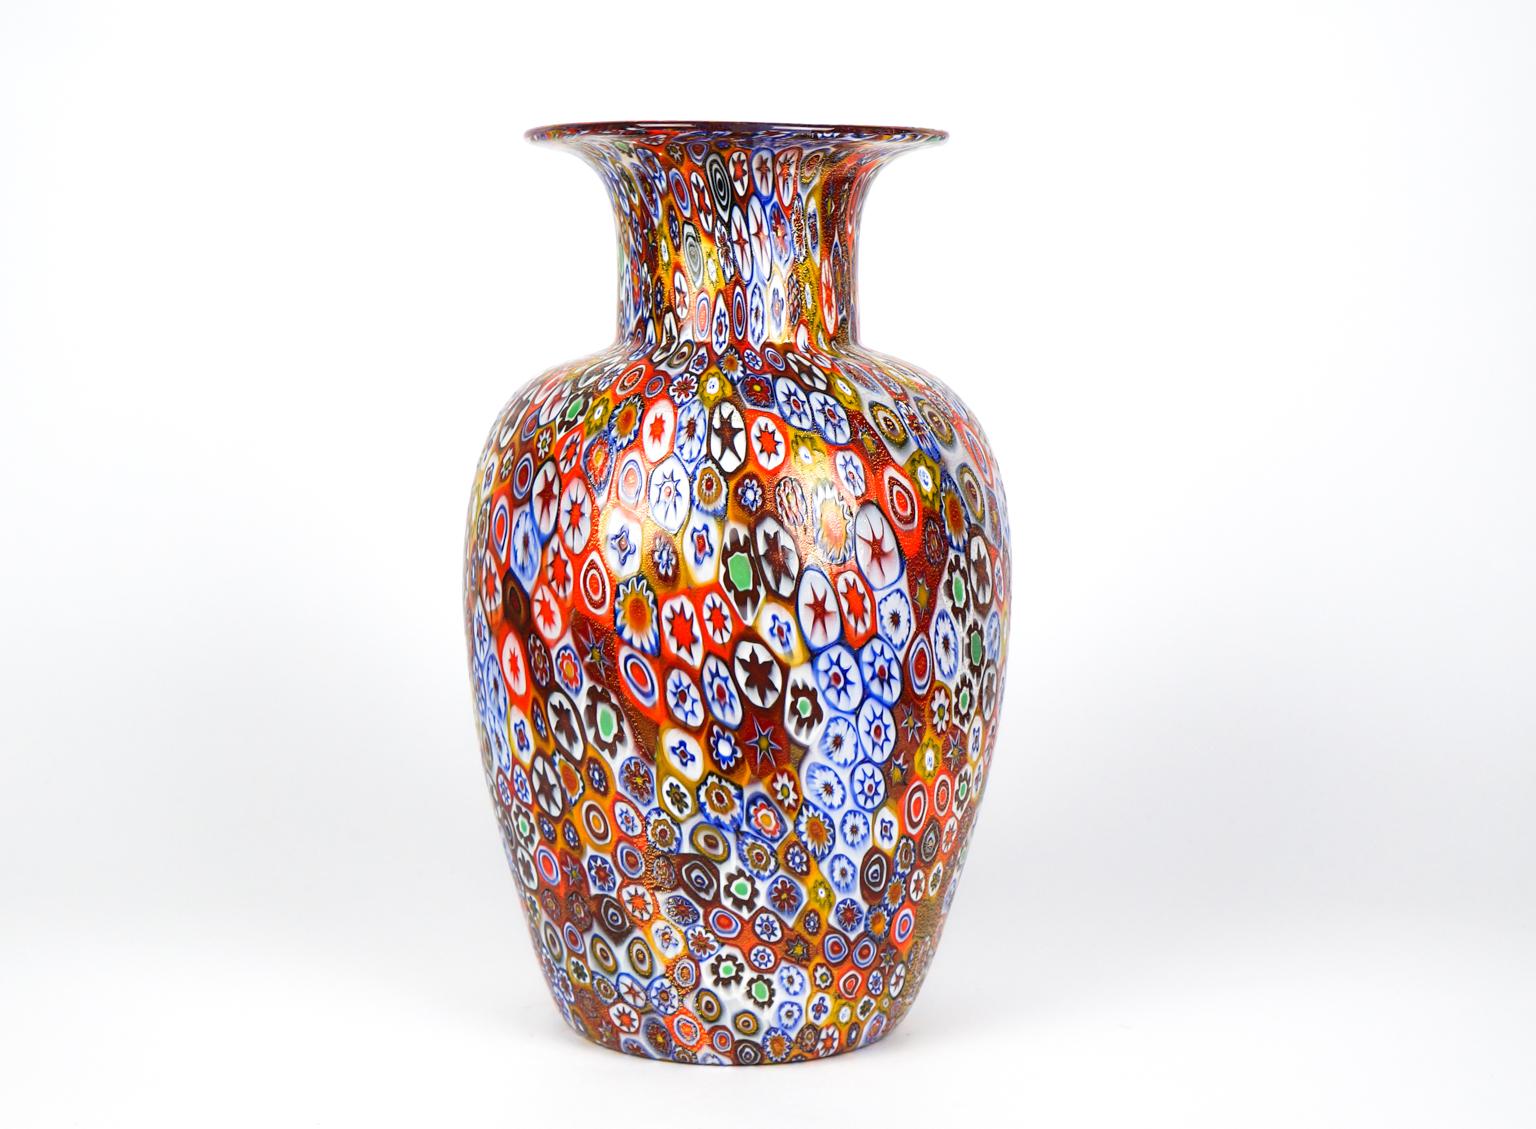 Exclusive working of Murano glass to produce this fantastic venetian blown glass vase with murrine Millefiori and covered with gold leaf 24 carats. 
This work is unique in the world for its combination of colors, elegance and sophistication. 
The